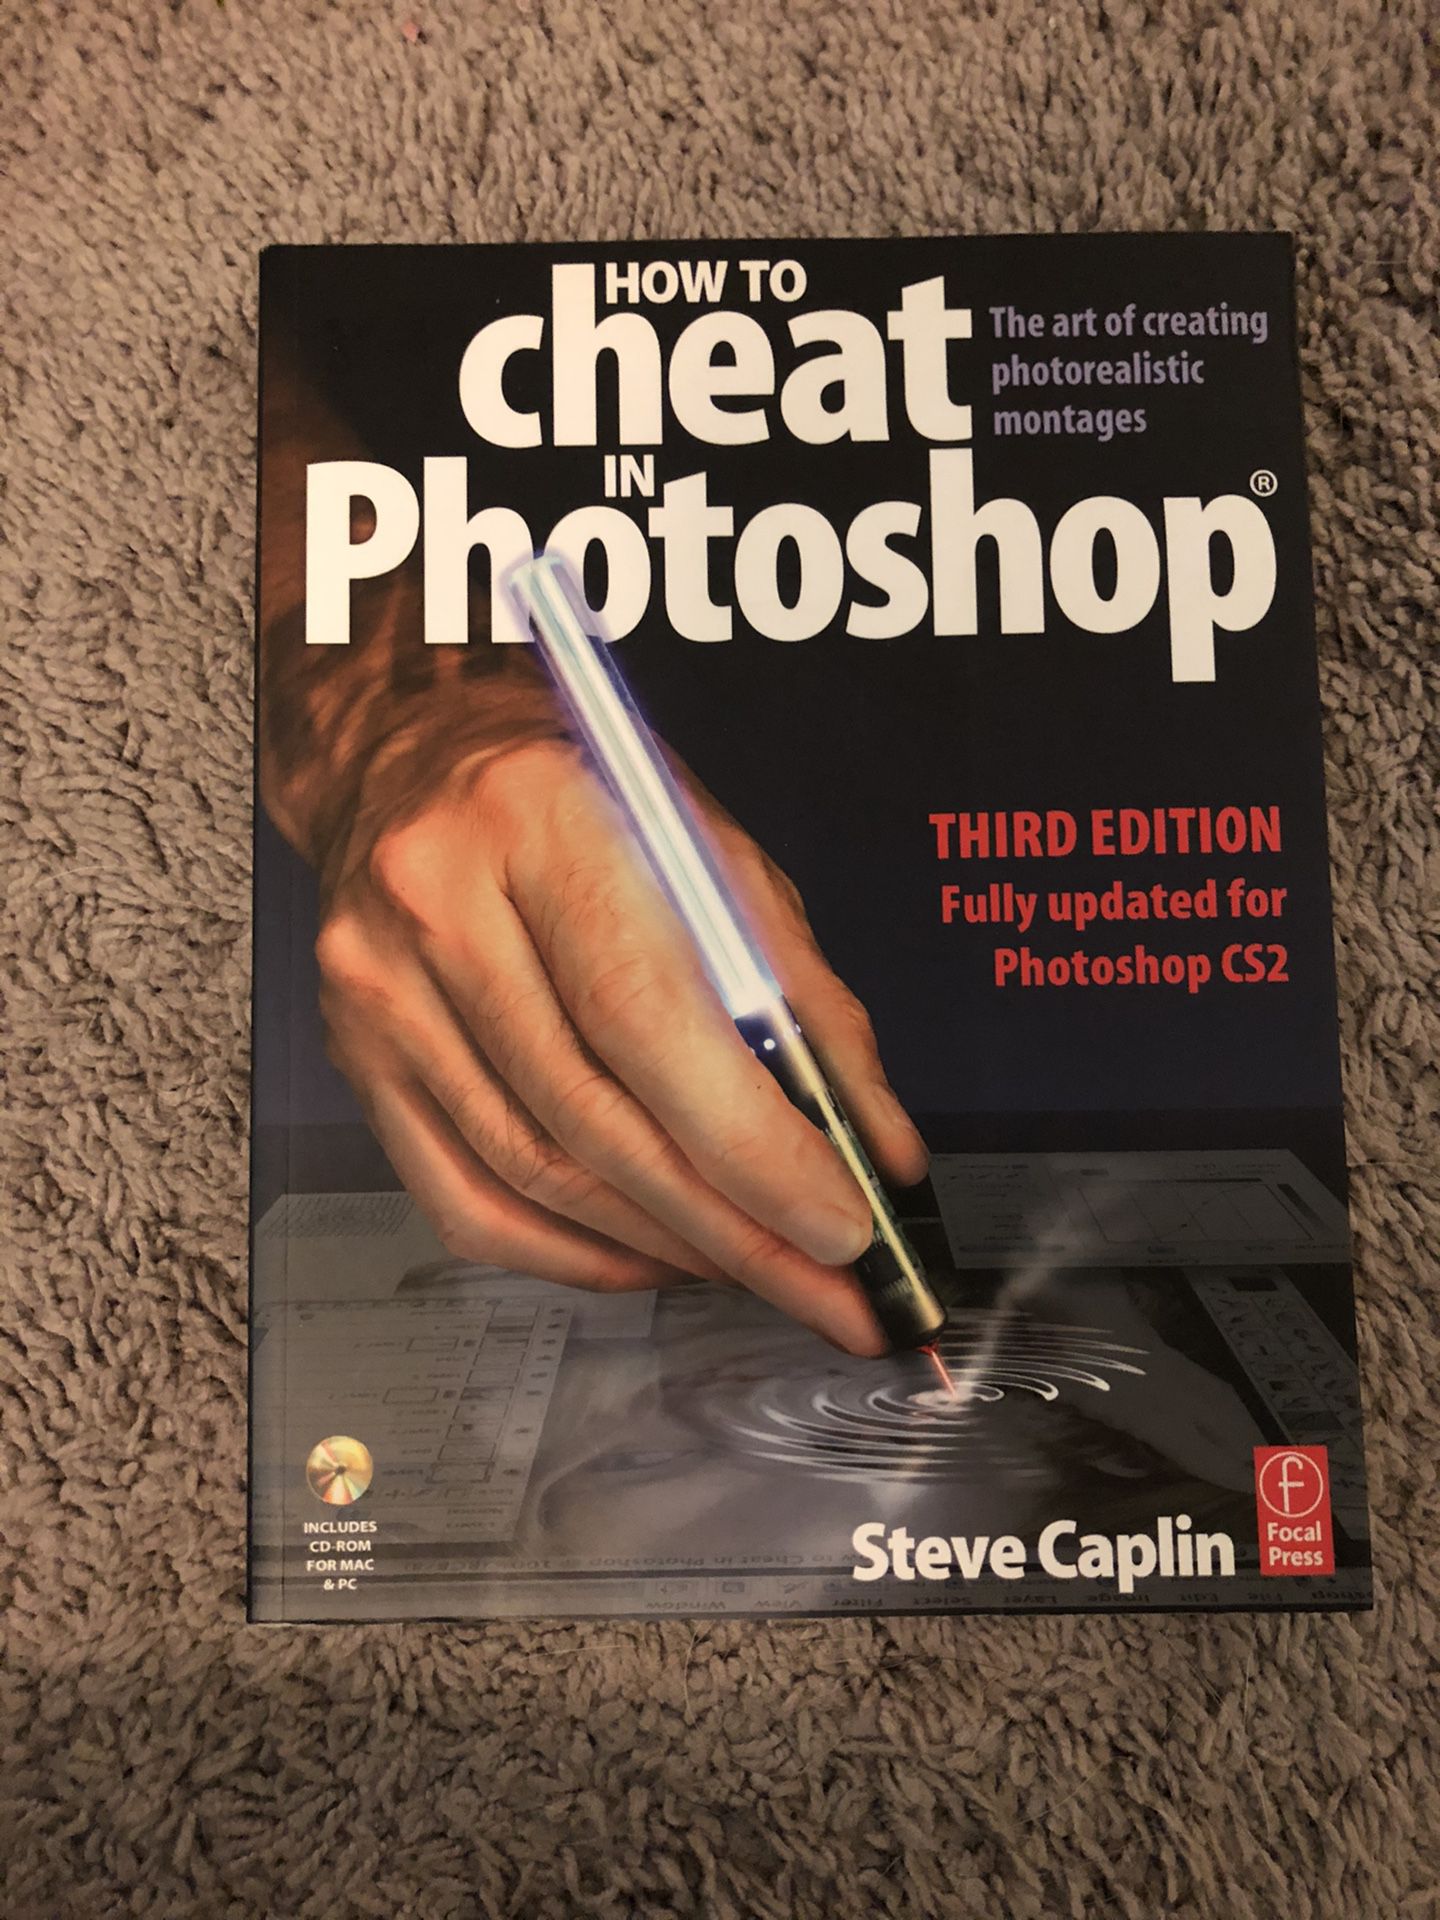 How to cheat in Photoshop book